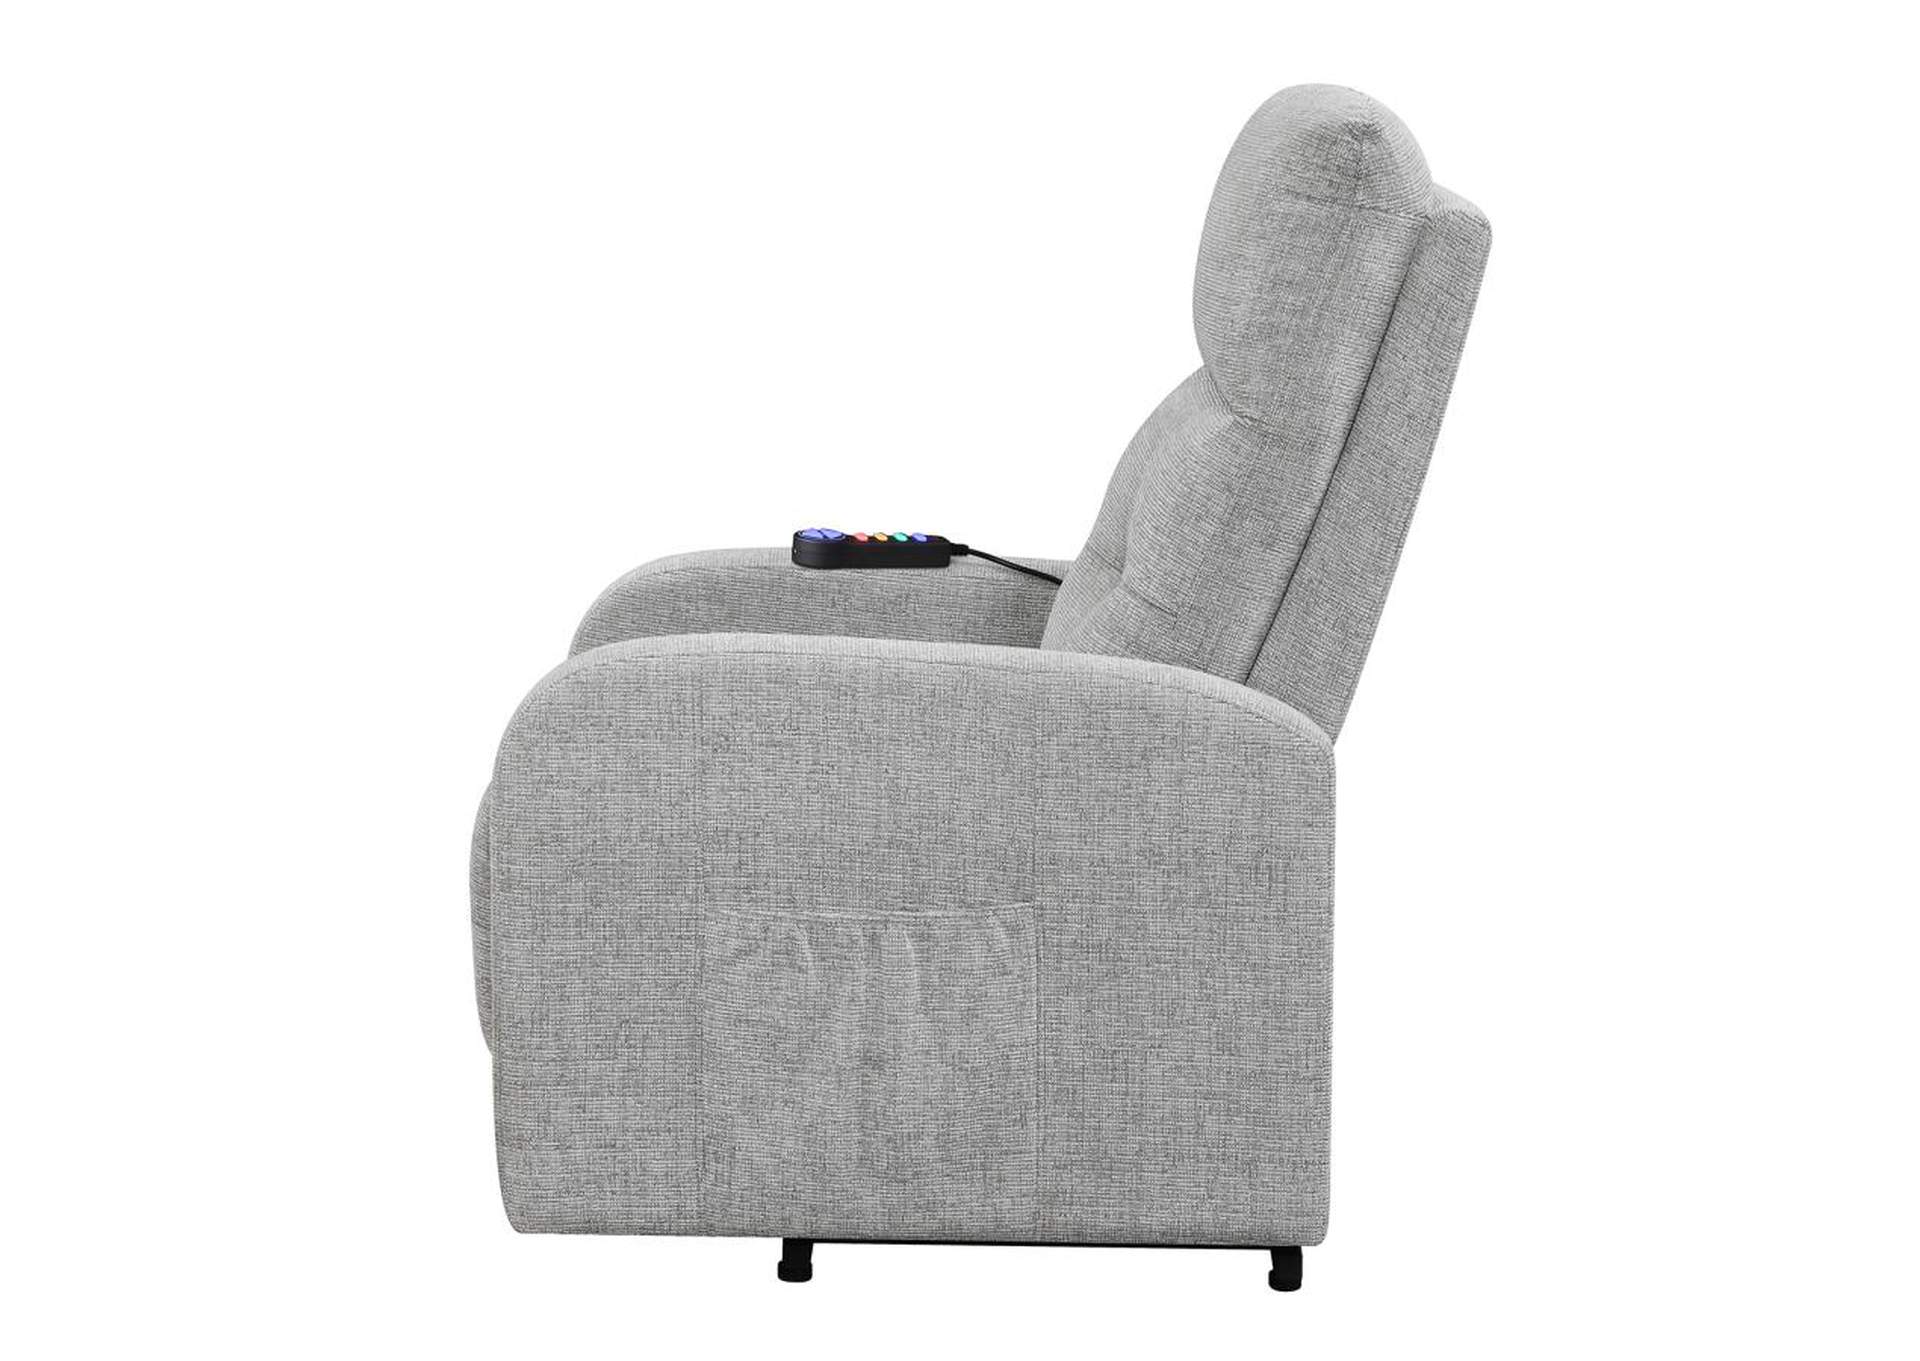 Howie Tufted Upholstered Power Lift Recliner Grey,Coaster Furniture